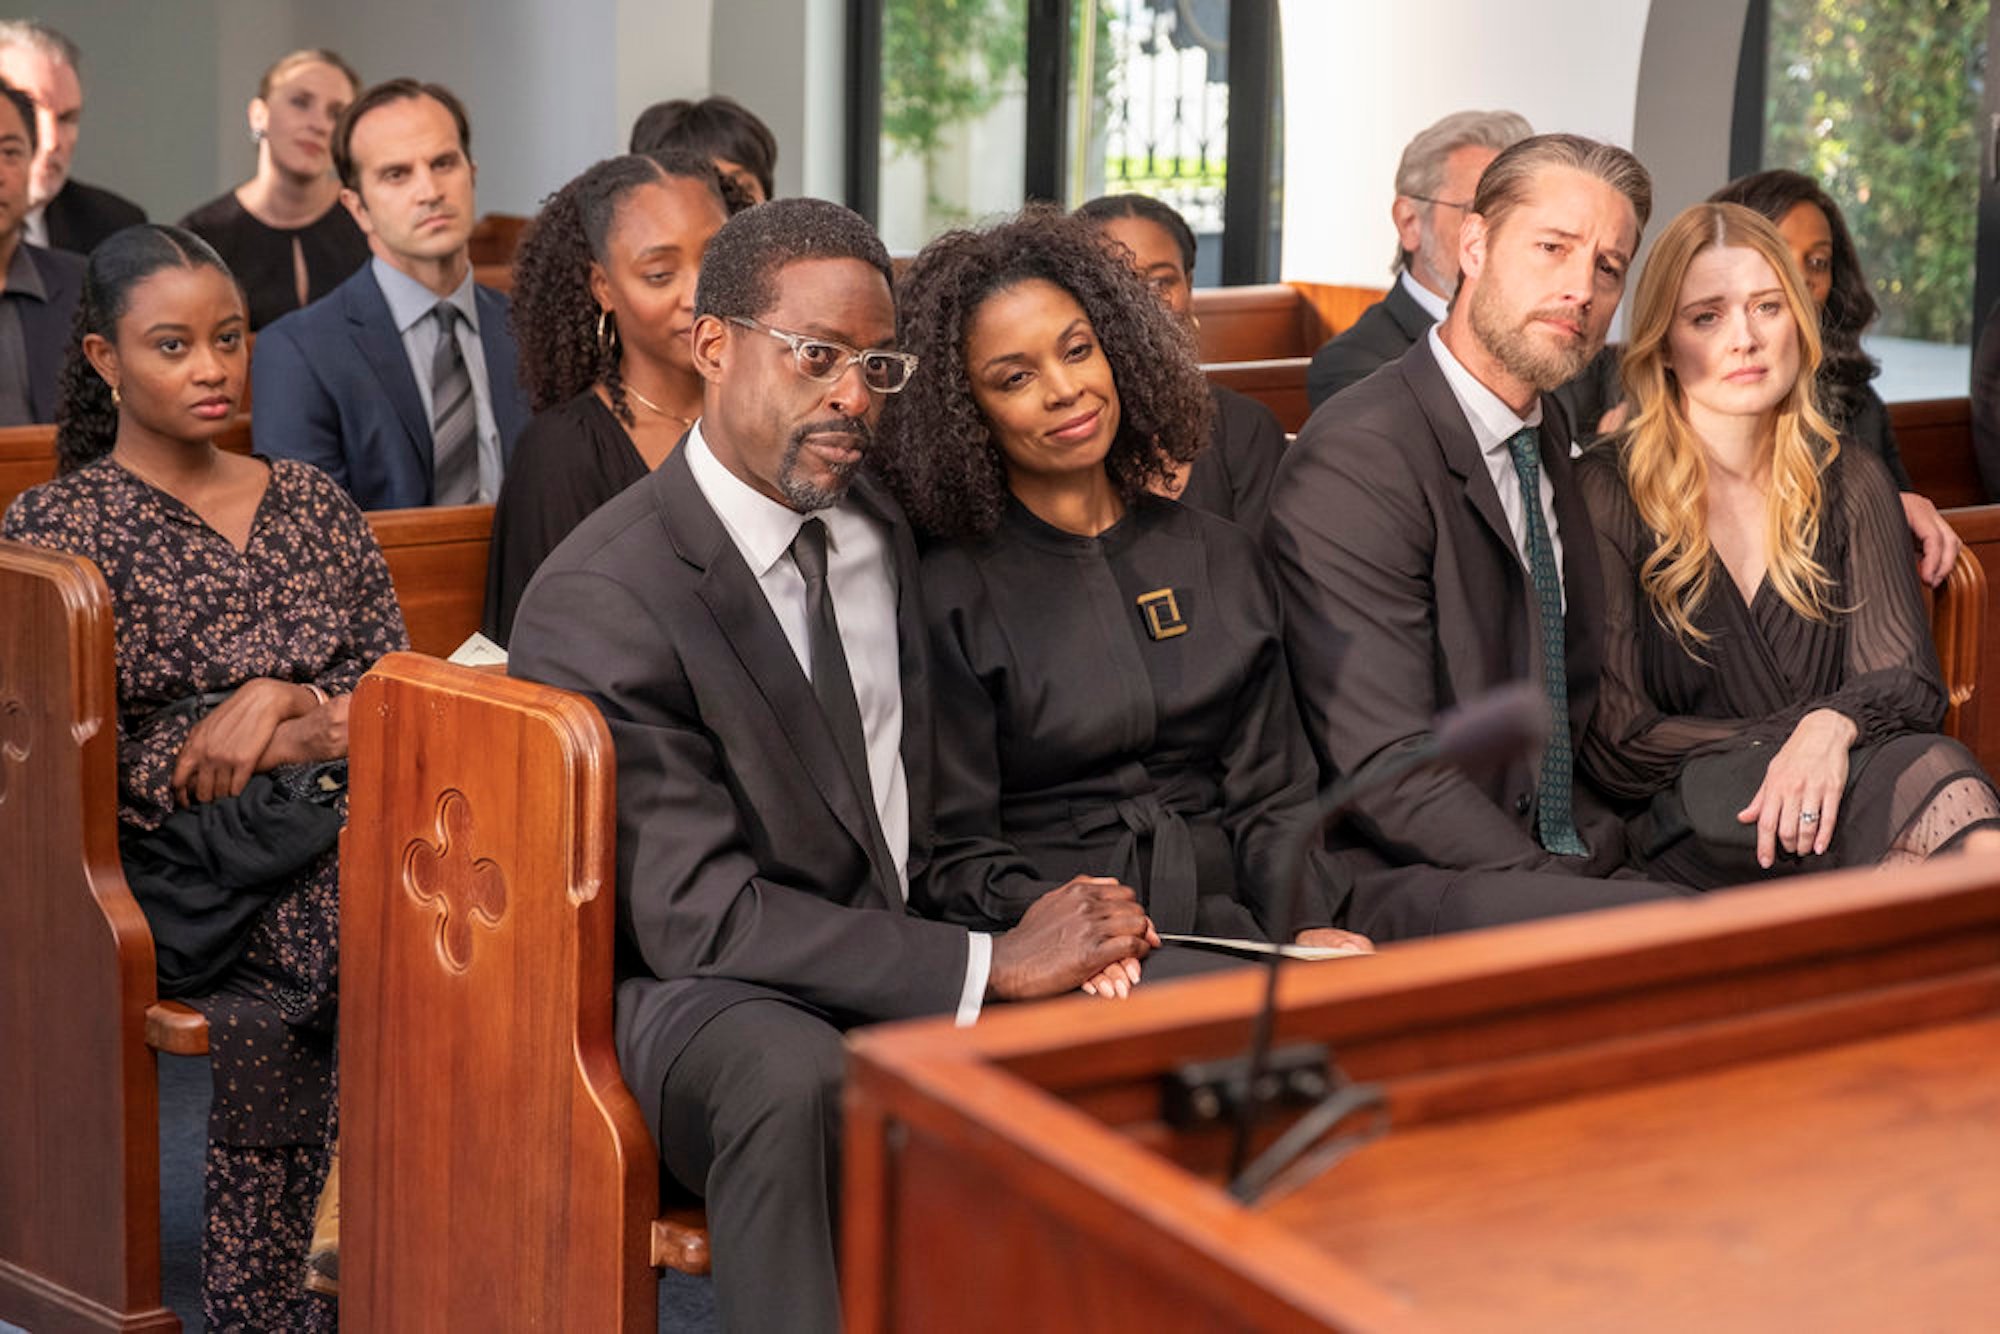 Annie, Tess, Randall, Kevin, and Sophie sitting together dressed in black at Rebecca's funeral in the 'This Is Us' Season 6 finale